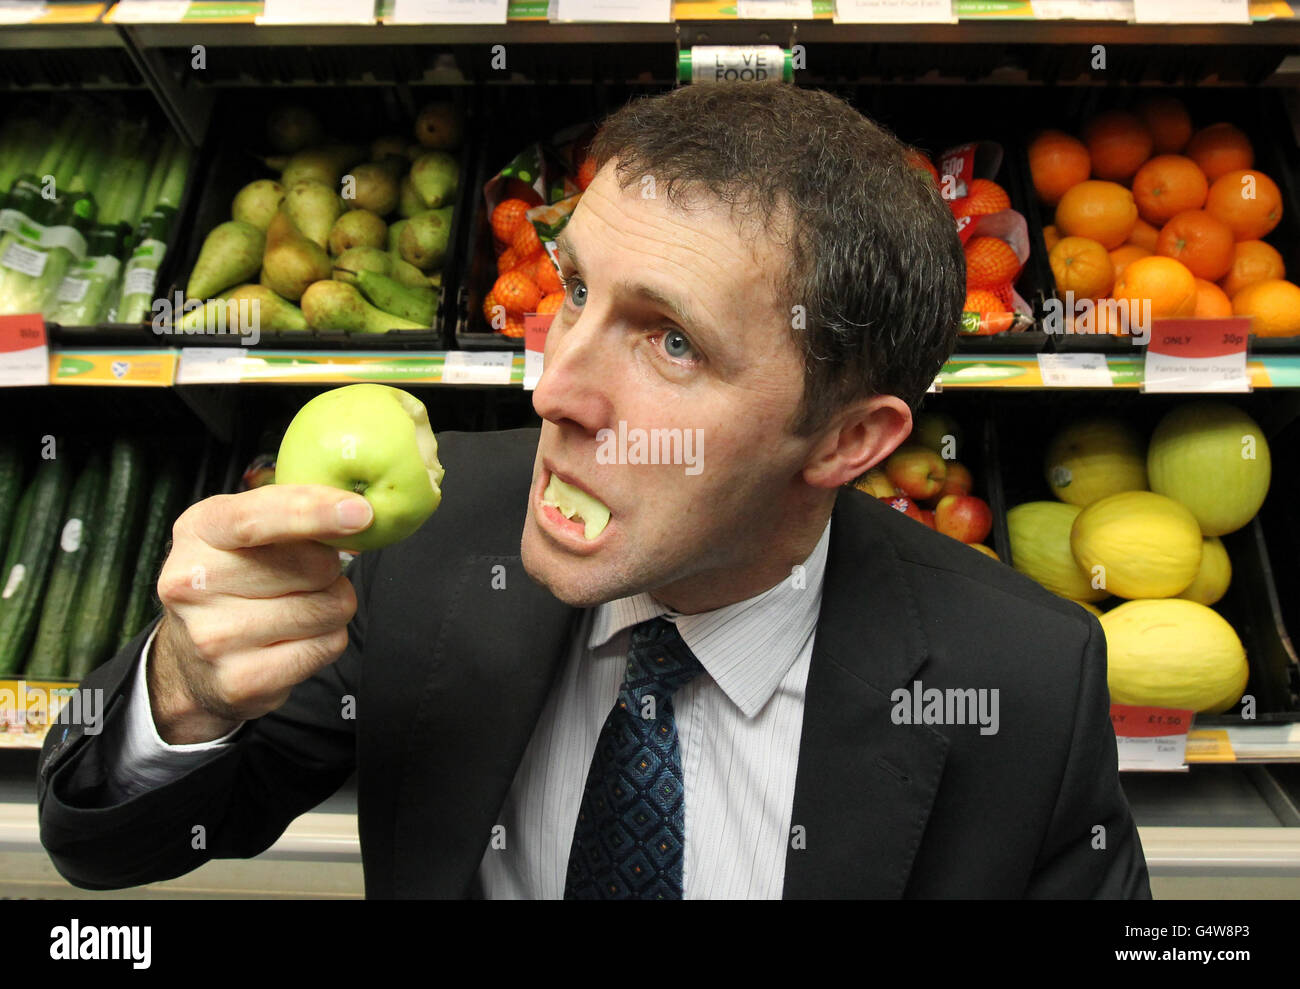 Public health minister Michael Matheson MSP eats an apple as he launches the Scottish Grocers Federation Healthy living programme at his local Scotmid co-operative store in Haggs near Bonnybridge. PRESS ASSOCIATION Photo. Picture date: Friday January 23, 2012. The aim of the campaign is to increase consumer awareness that healthy food is available within their local convenience stores. Photo credit should read: Andrew Milligan/PA Wire Stock Photo